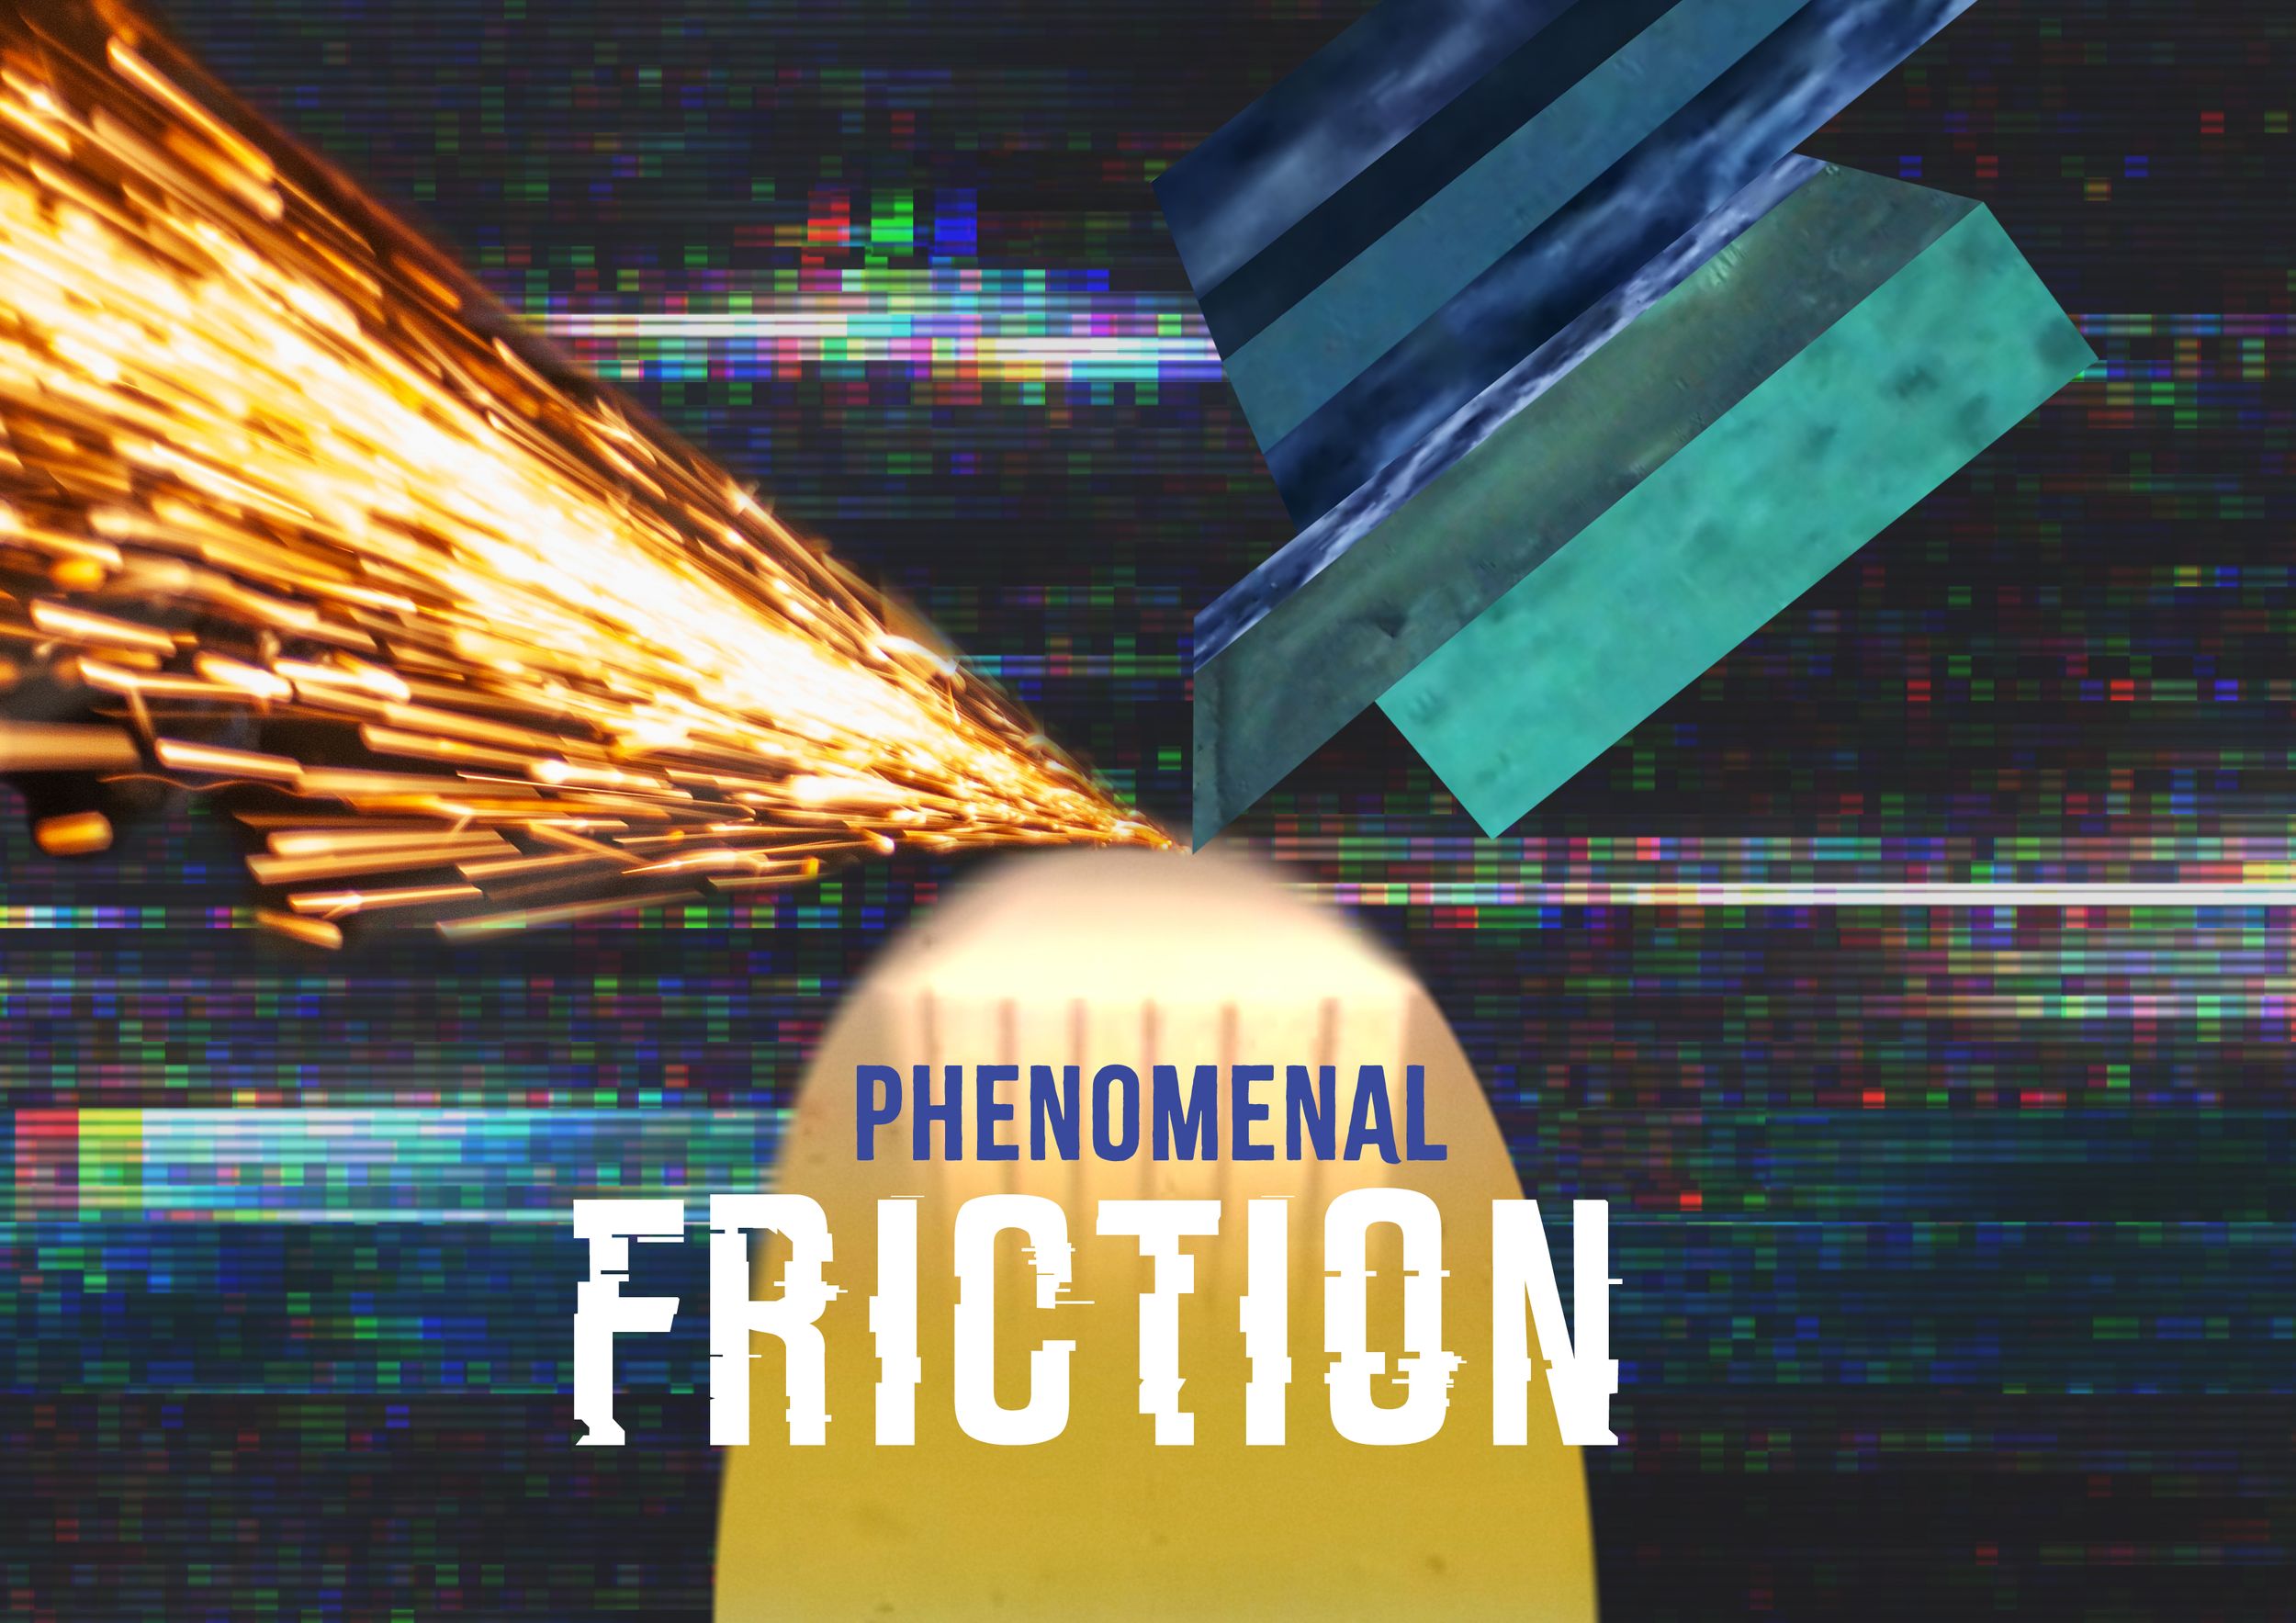 DocLab Exhibition: Phenomenal Friction